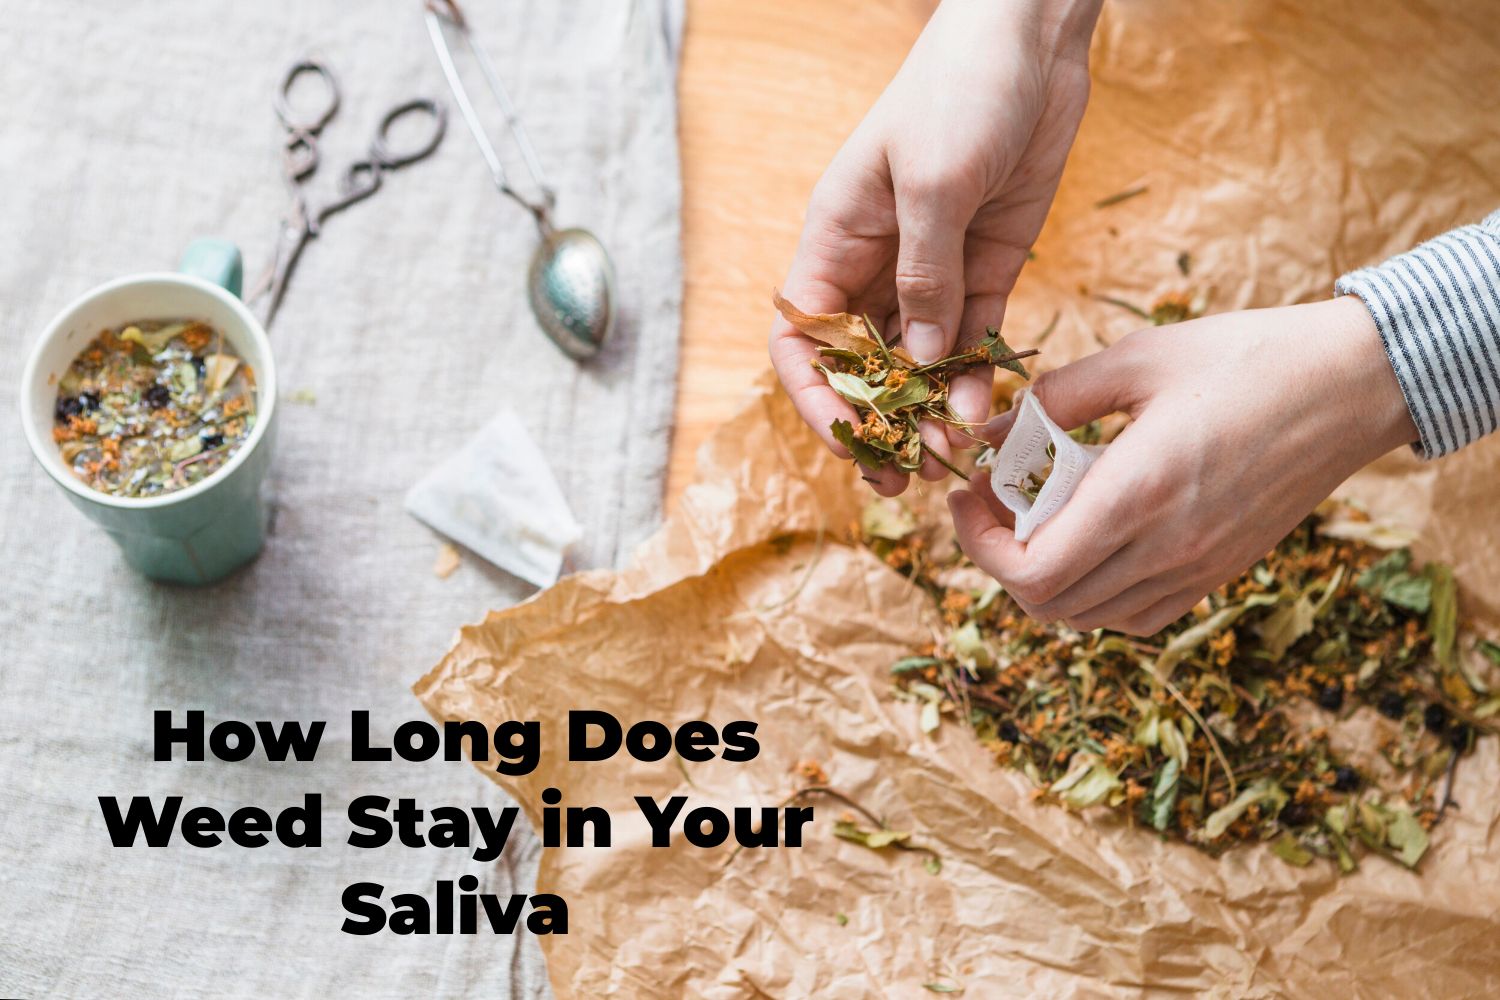 How Long Does Weed Stay in Your Saliva